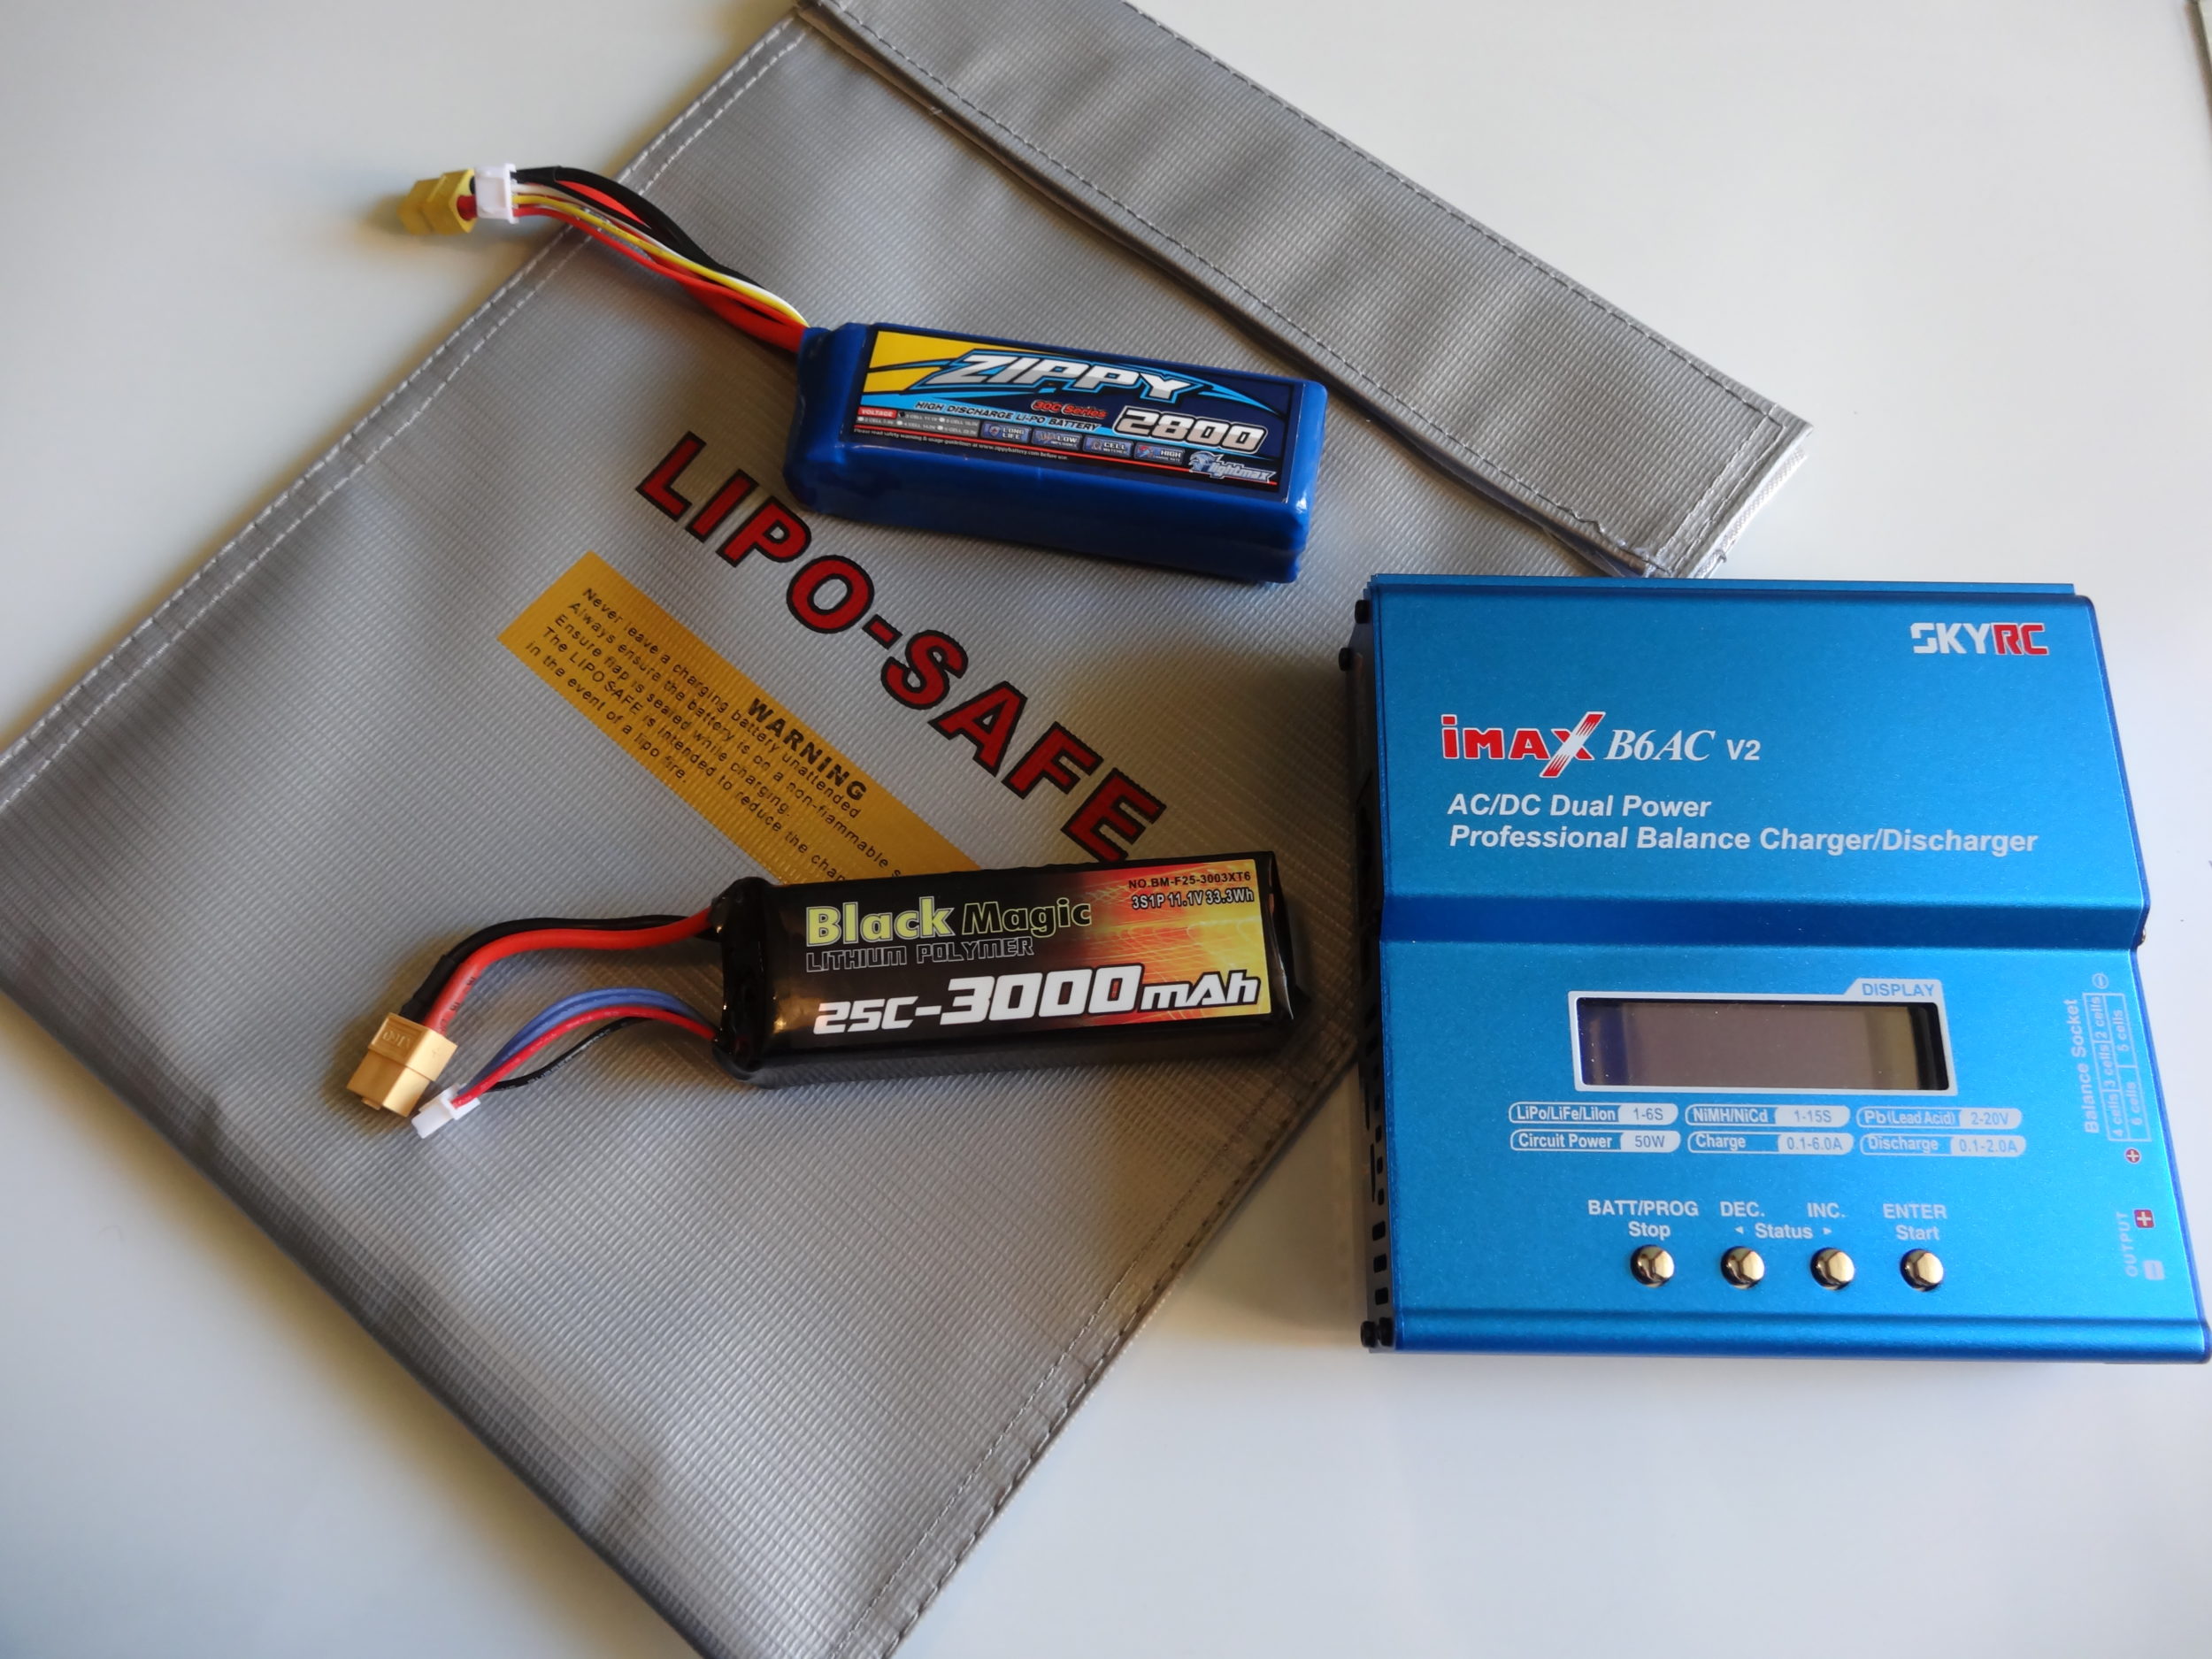 Rc Car Battery Chargers from .com. How to storage/discharge